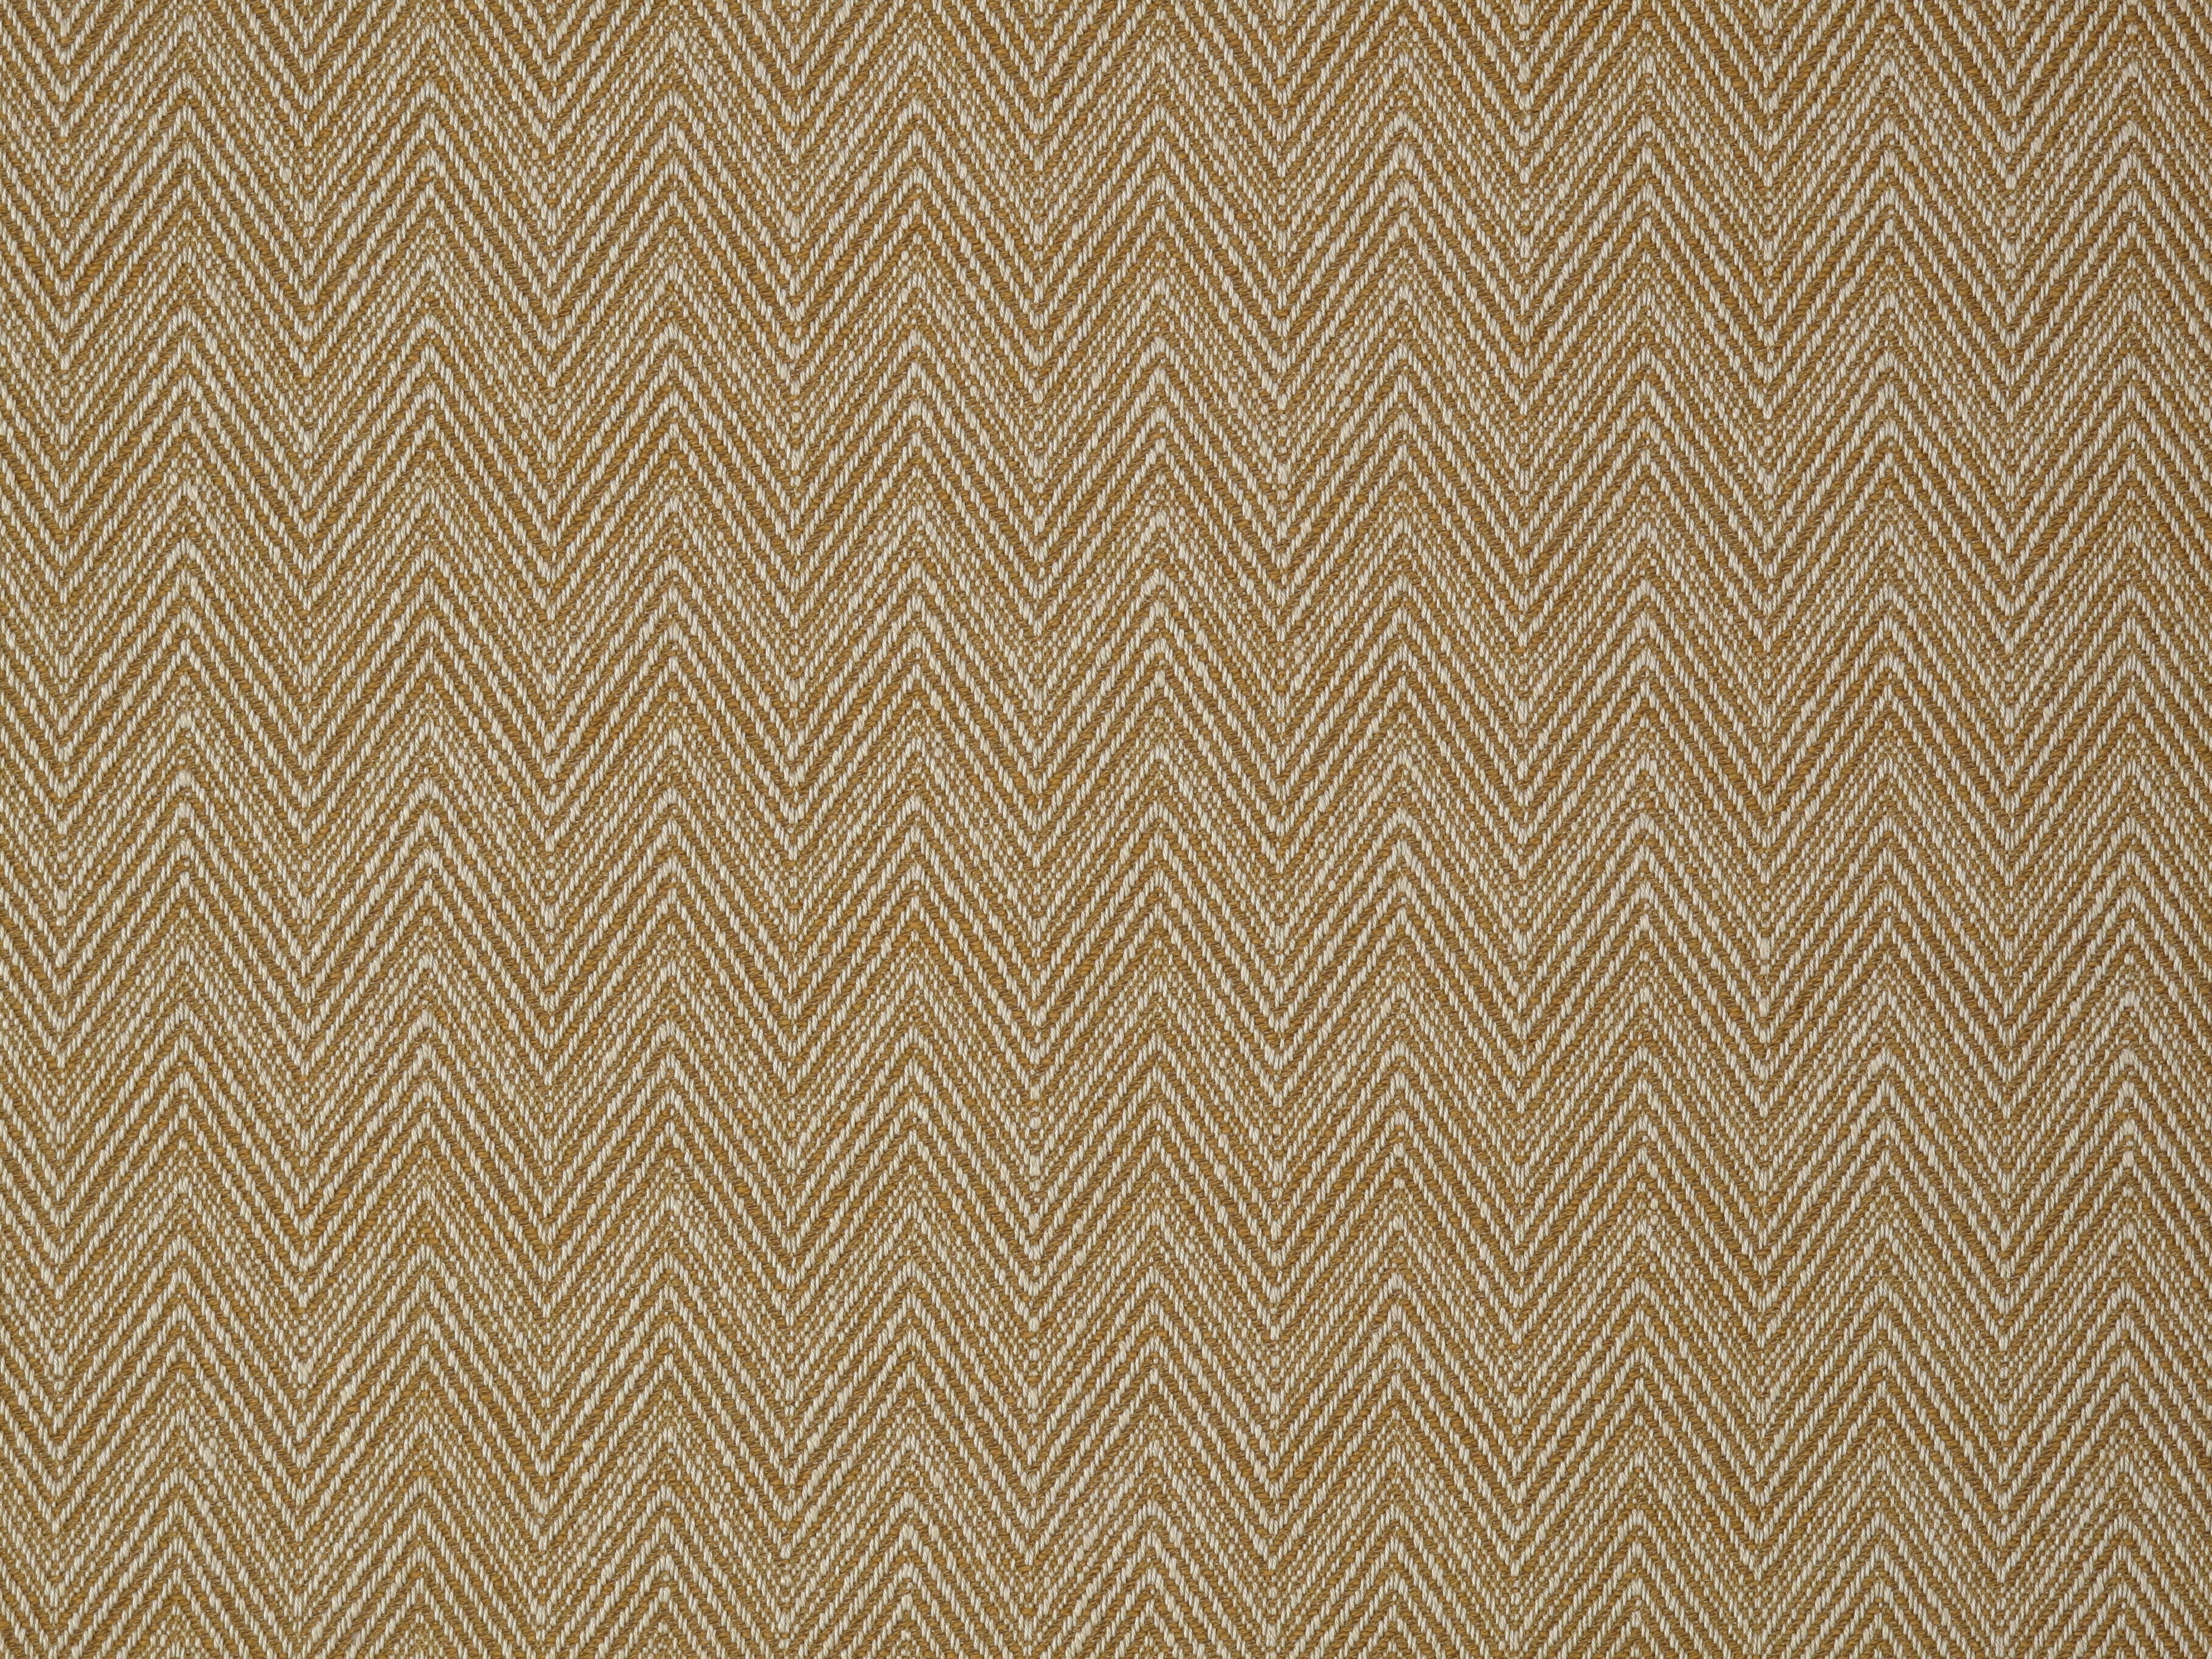 Berwick fabric in caramel color - pattern number PN 92054082 - by Scalamandre in the Old World Weavers collection